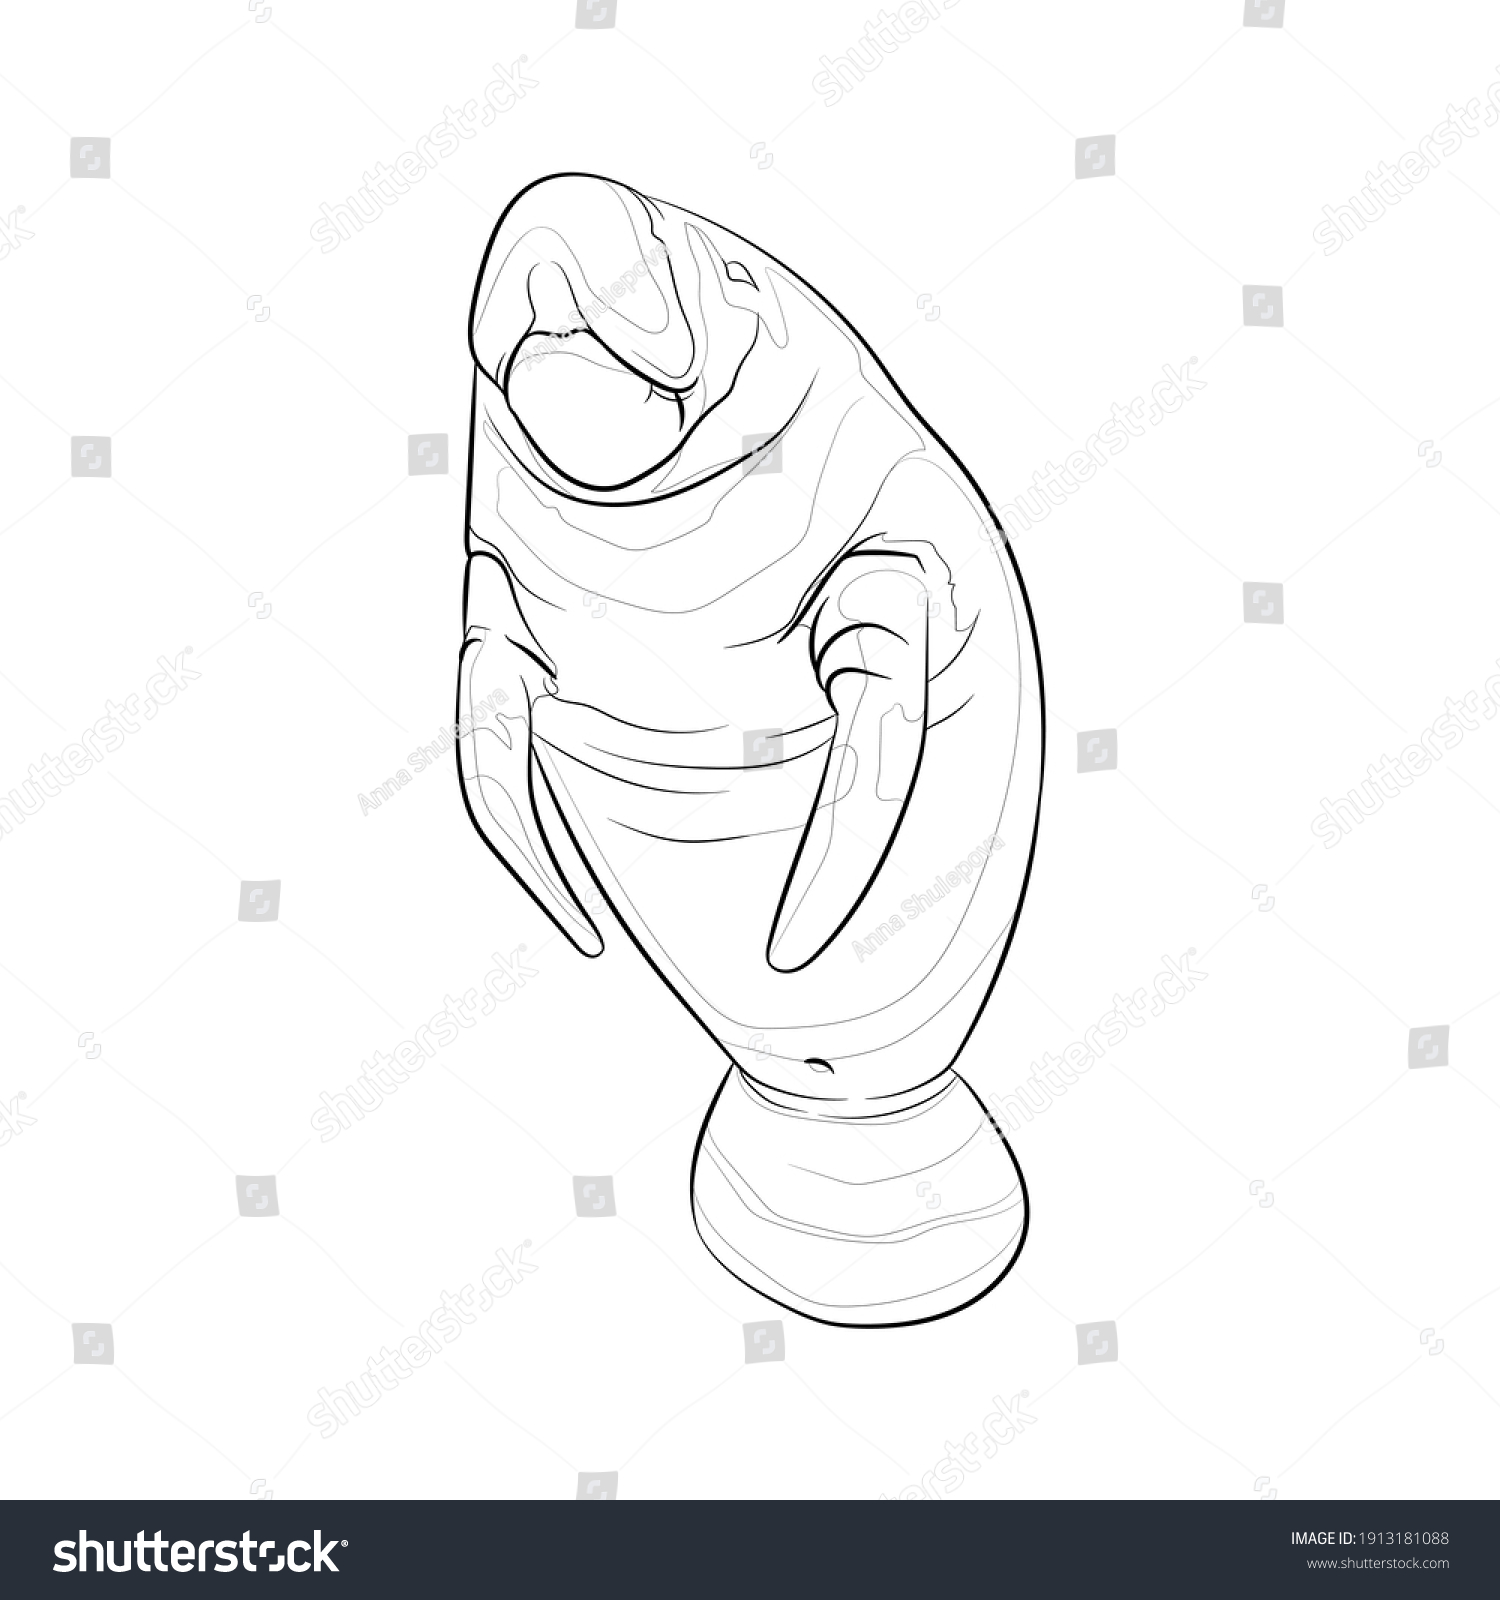 SVG of Manatee (Sea cow). Line drawing. Black and white illustration. Vector. svg